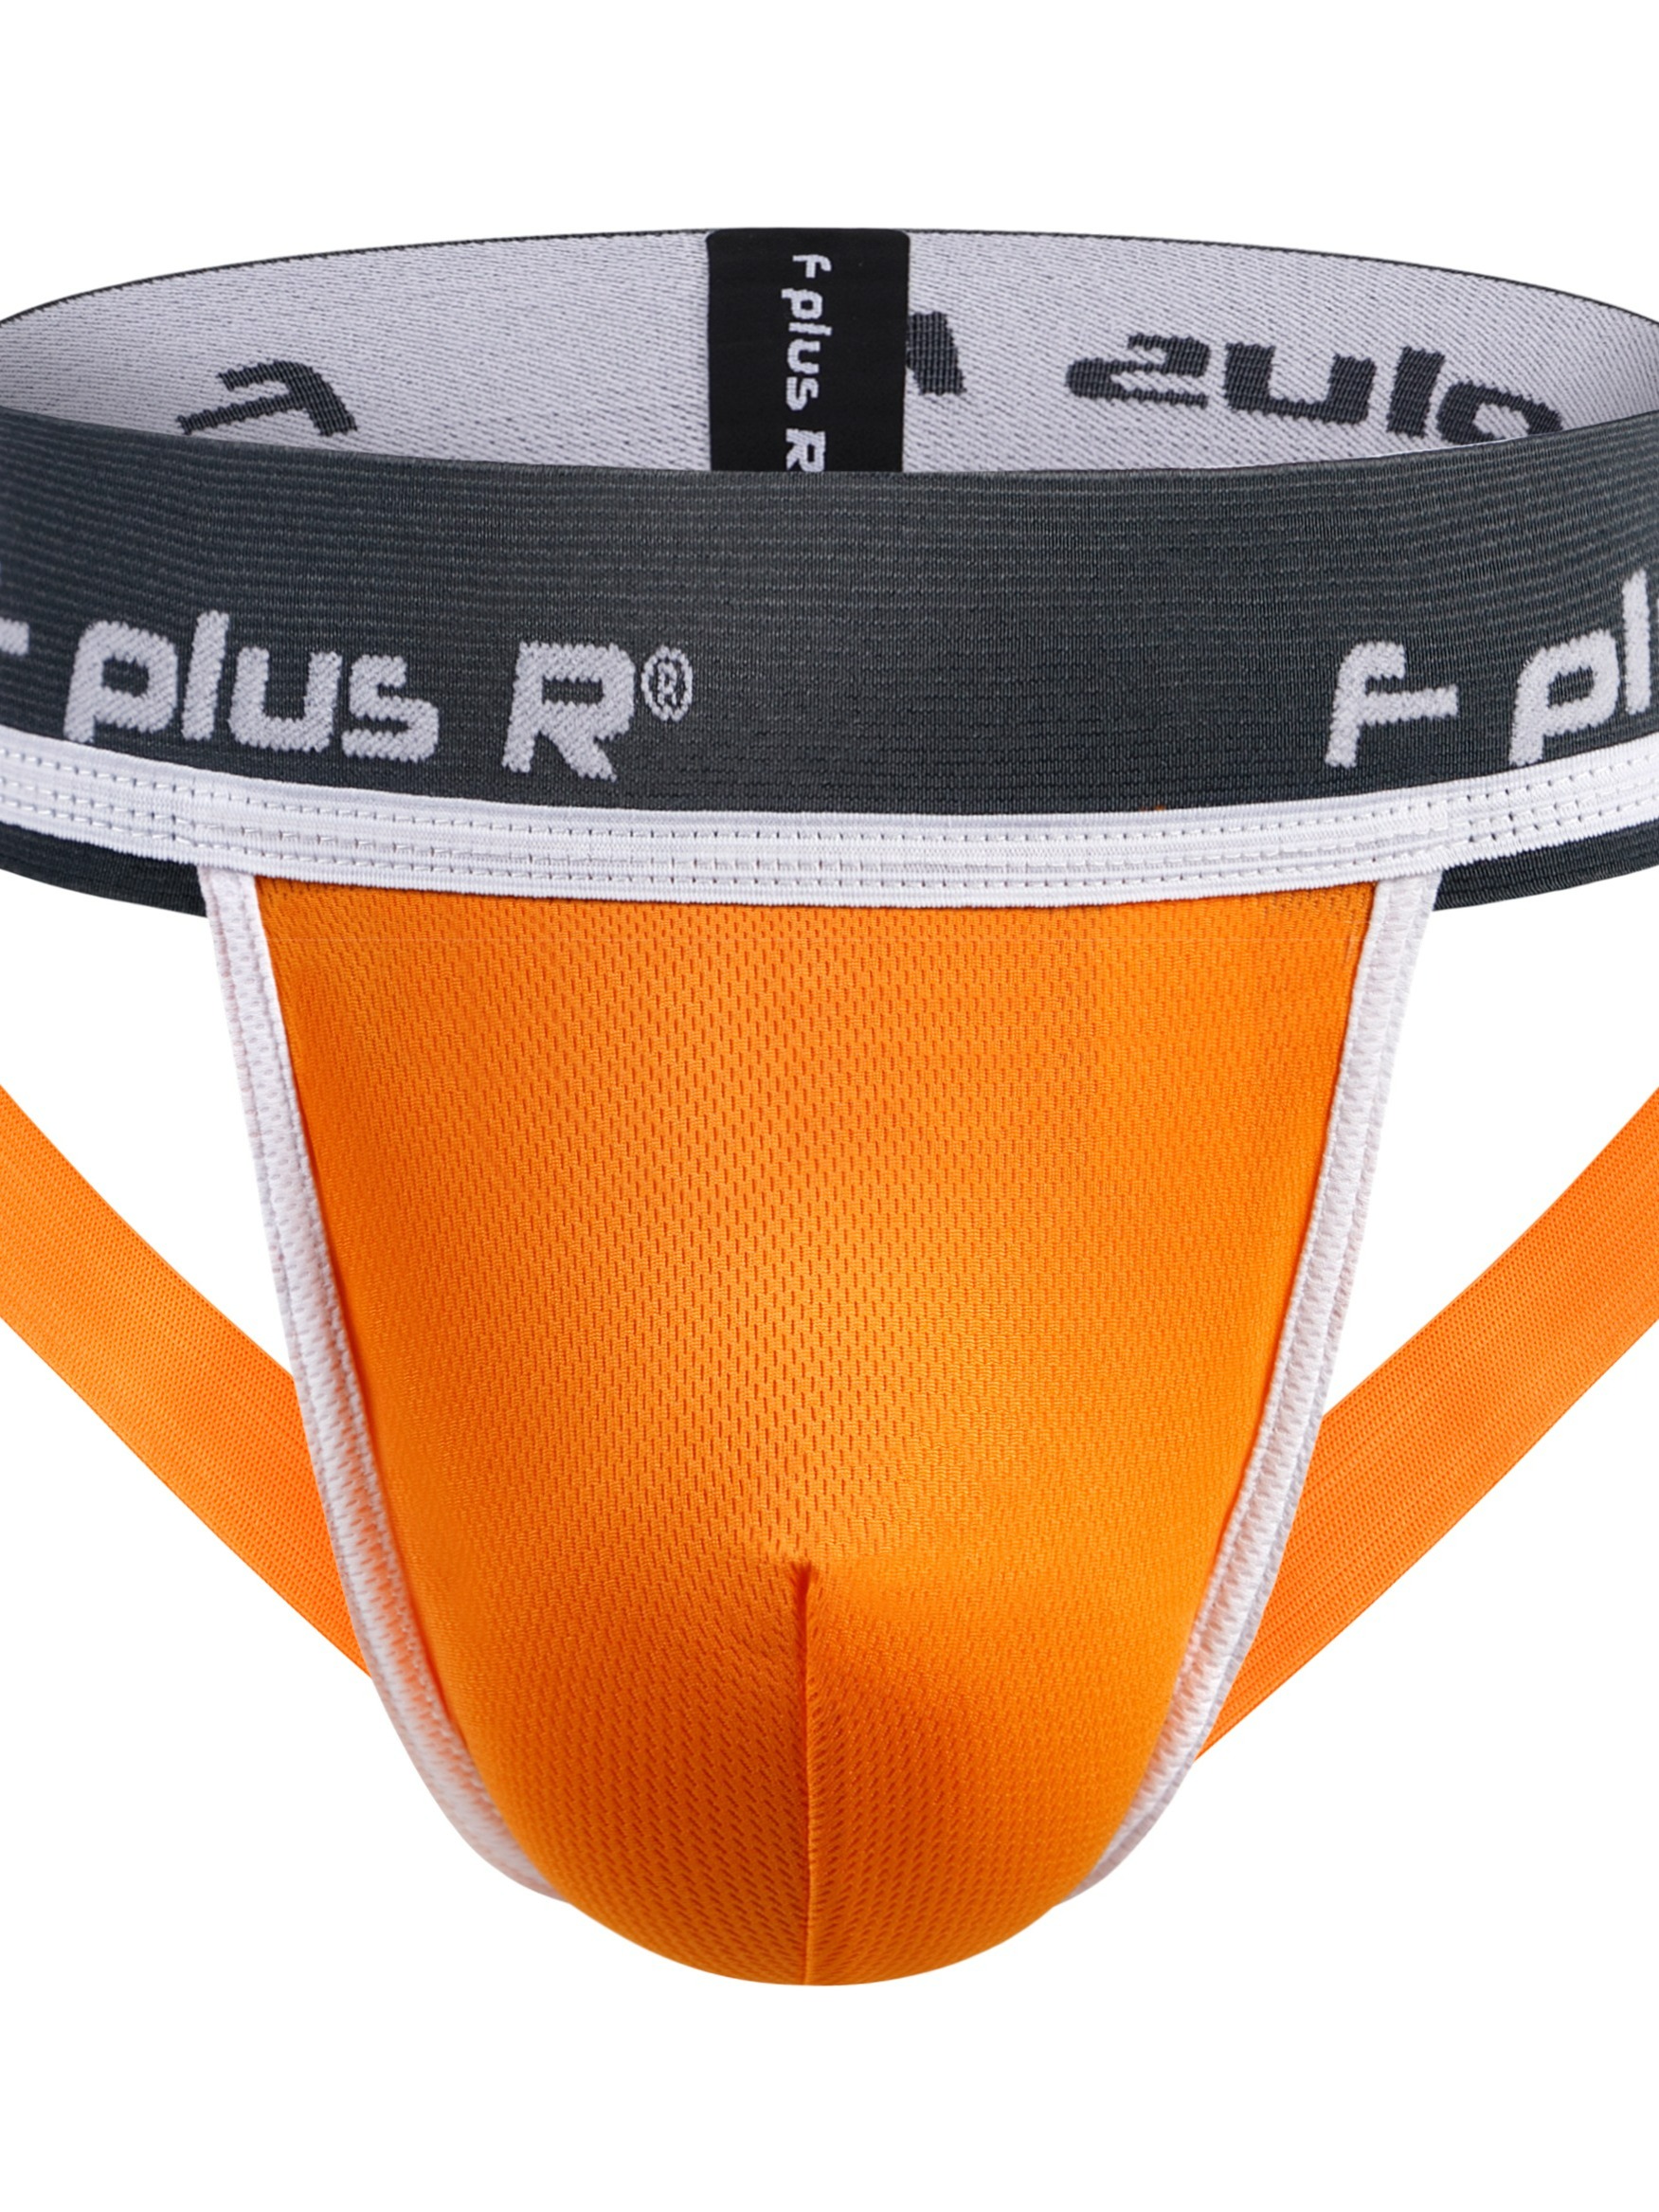 Men Athletic Gym Cotton Stretchable Supporter with Cup Pocket for